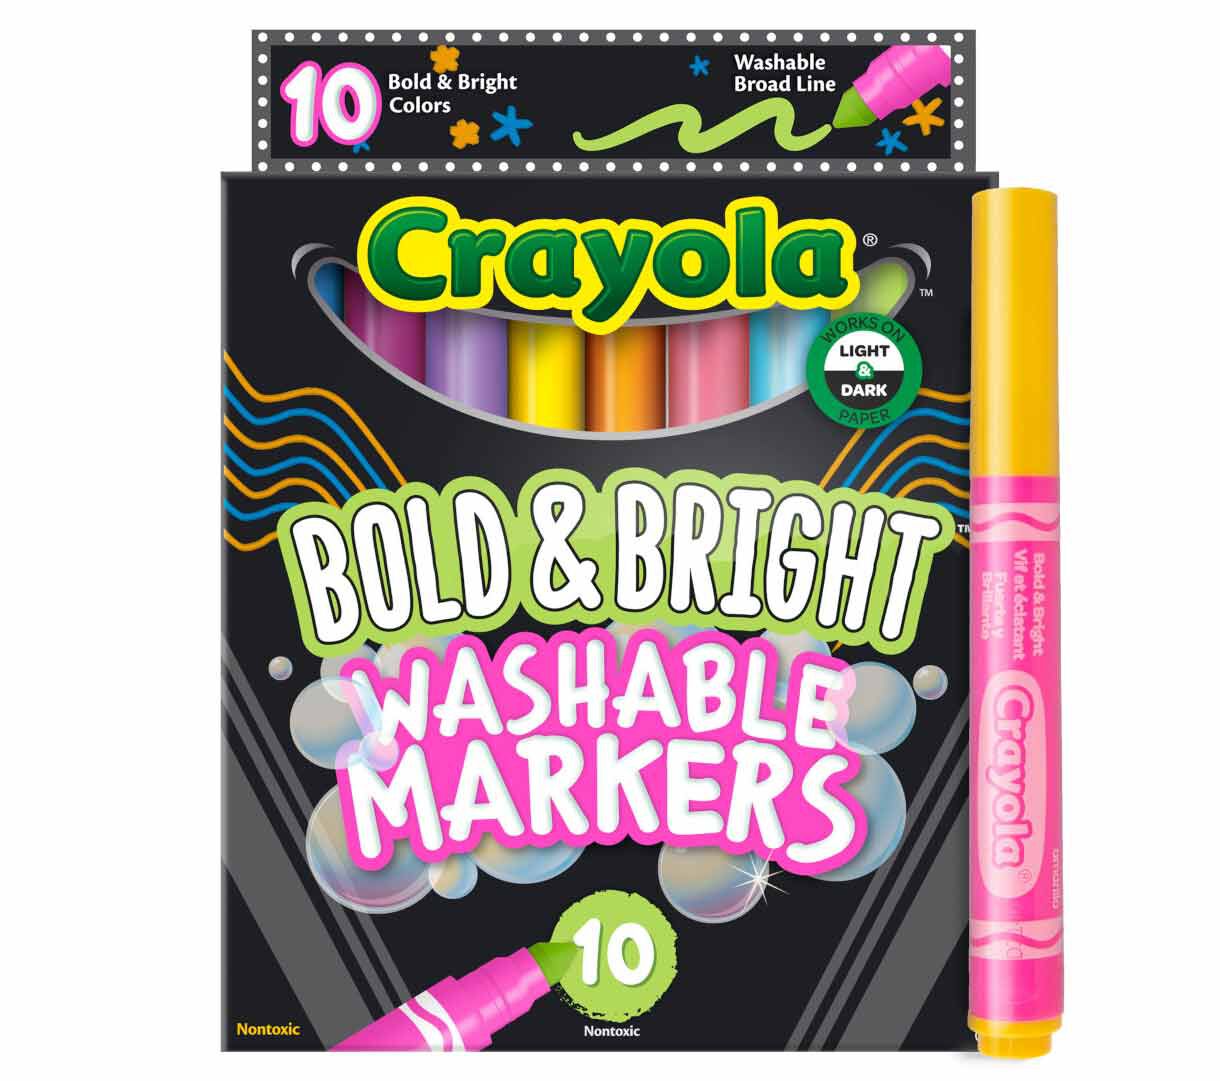 Bold & Bright Broad Line Washable Markers - 10 Count | Crayola.com